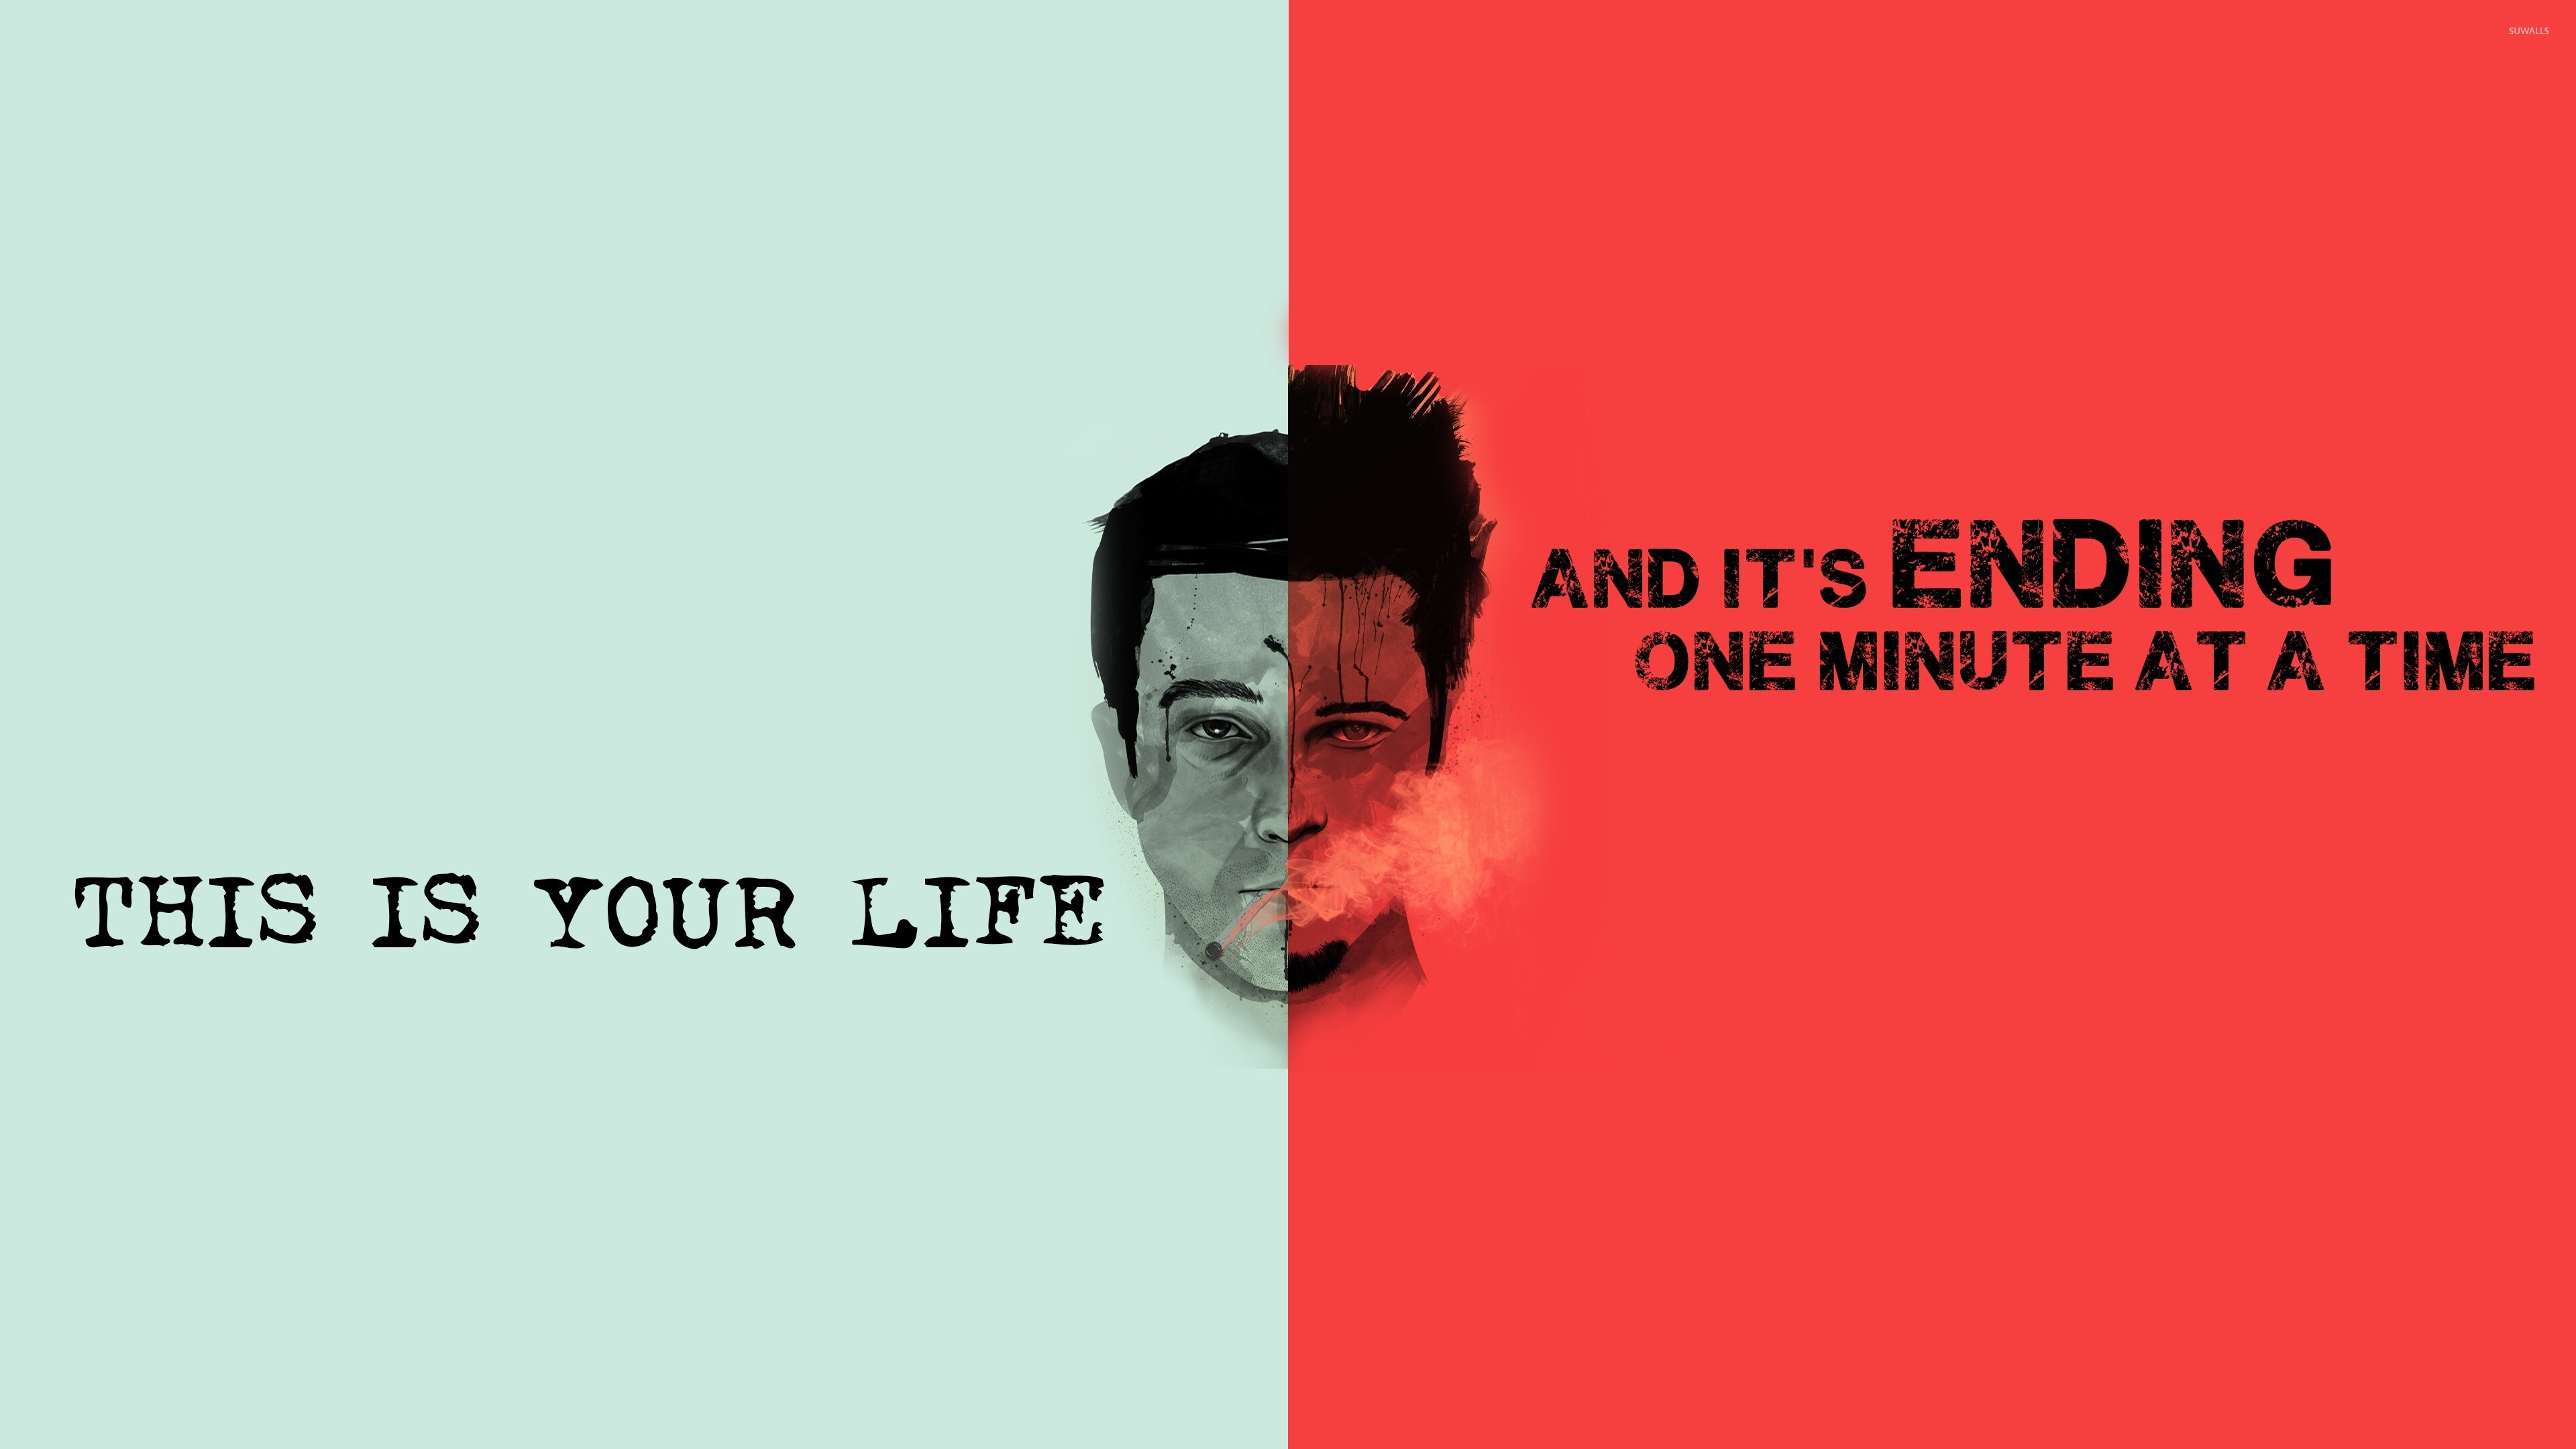 Fight Club: This is your life and it's ending one minute at a time. 3840x2160 4K Wallpaper.